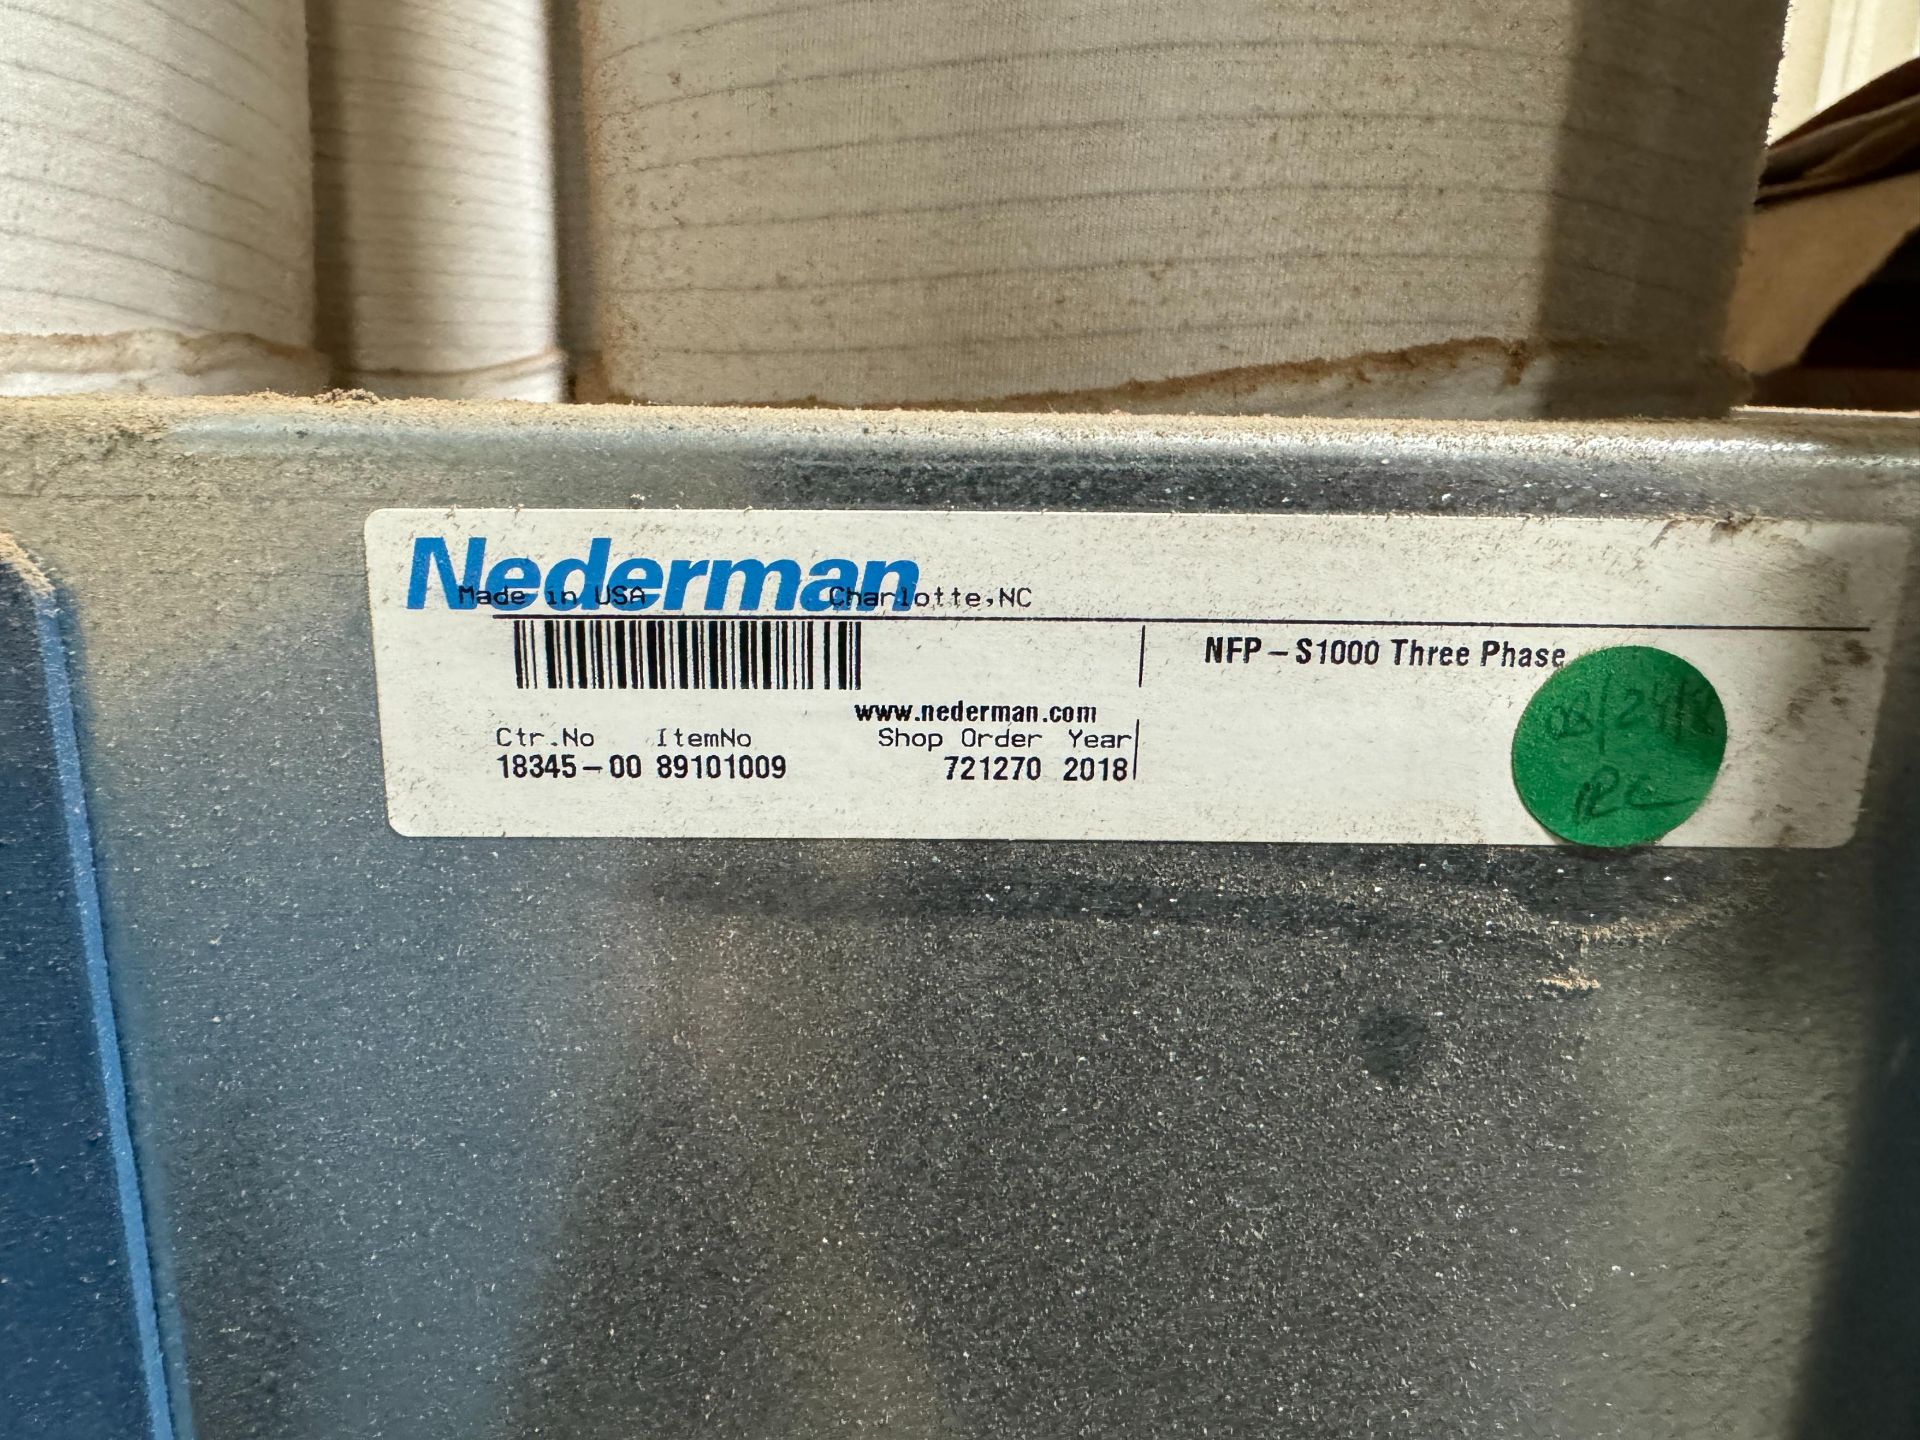 2018 NEDERMAN NFP-S1000 BAG FILTER DUST COLLECTOR, CTR. NO. 18345-00, ITEM NO. 89101009, 10 HP, 3- - Image 5 of 7